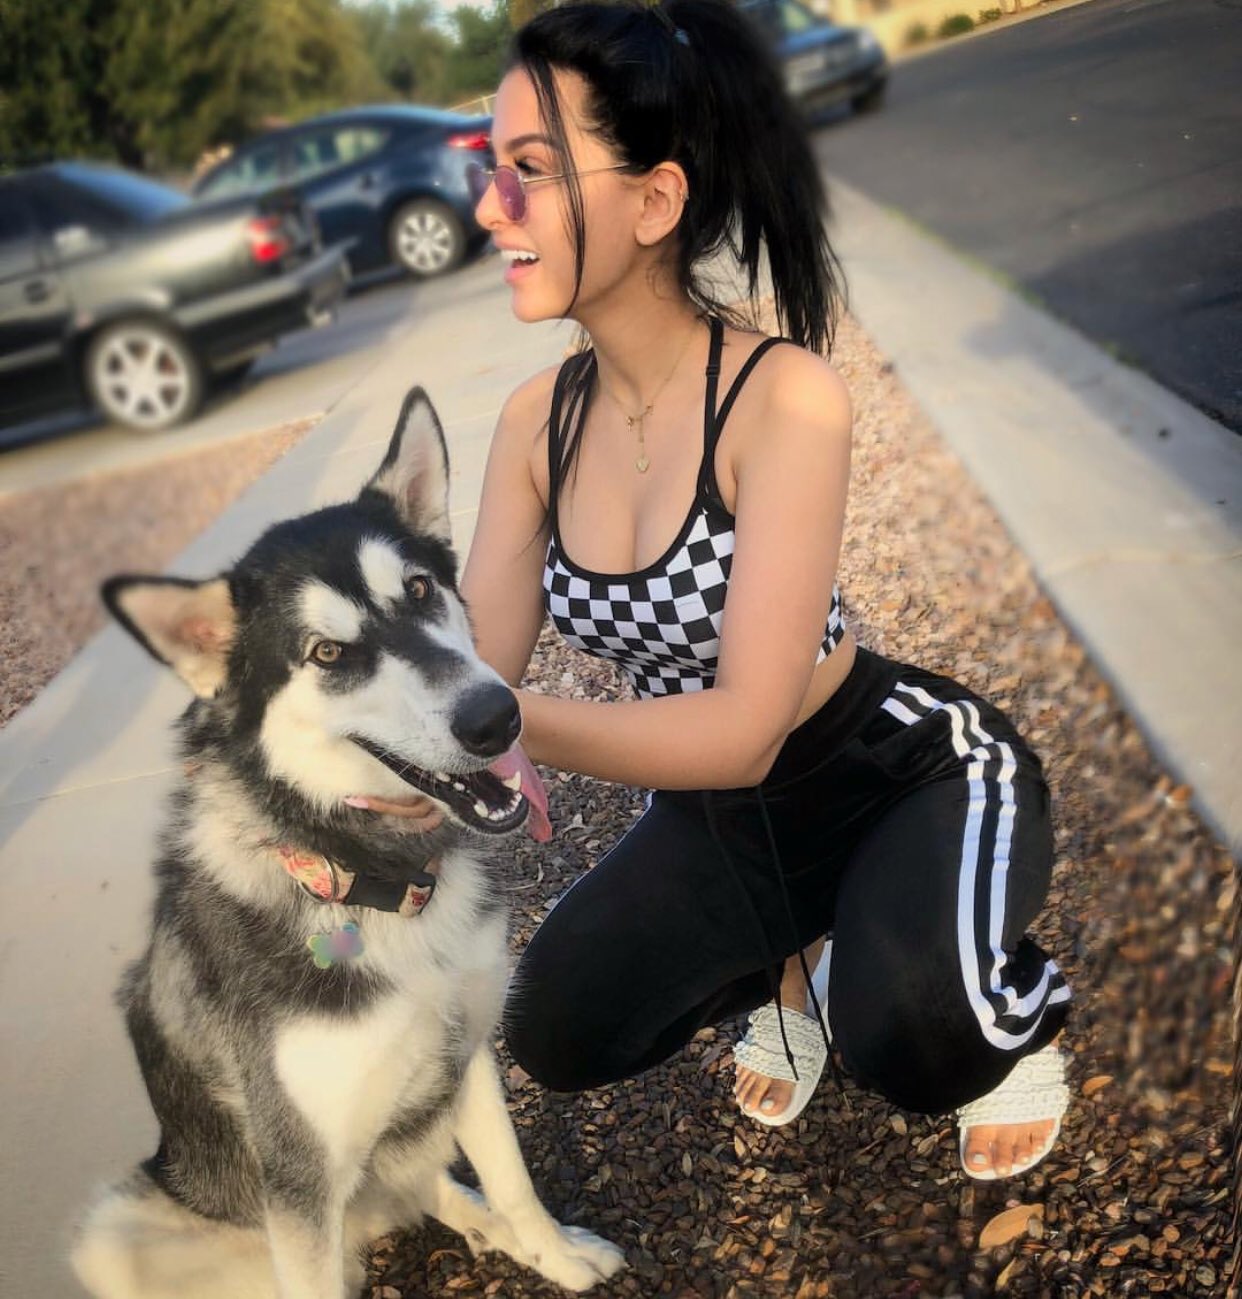 Wolfie. 🐺 on Twitter: "@sssniperwolf wow! It's been a long time since I